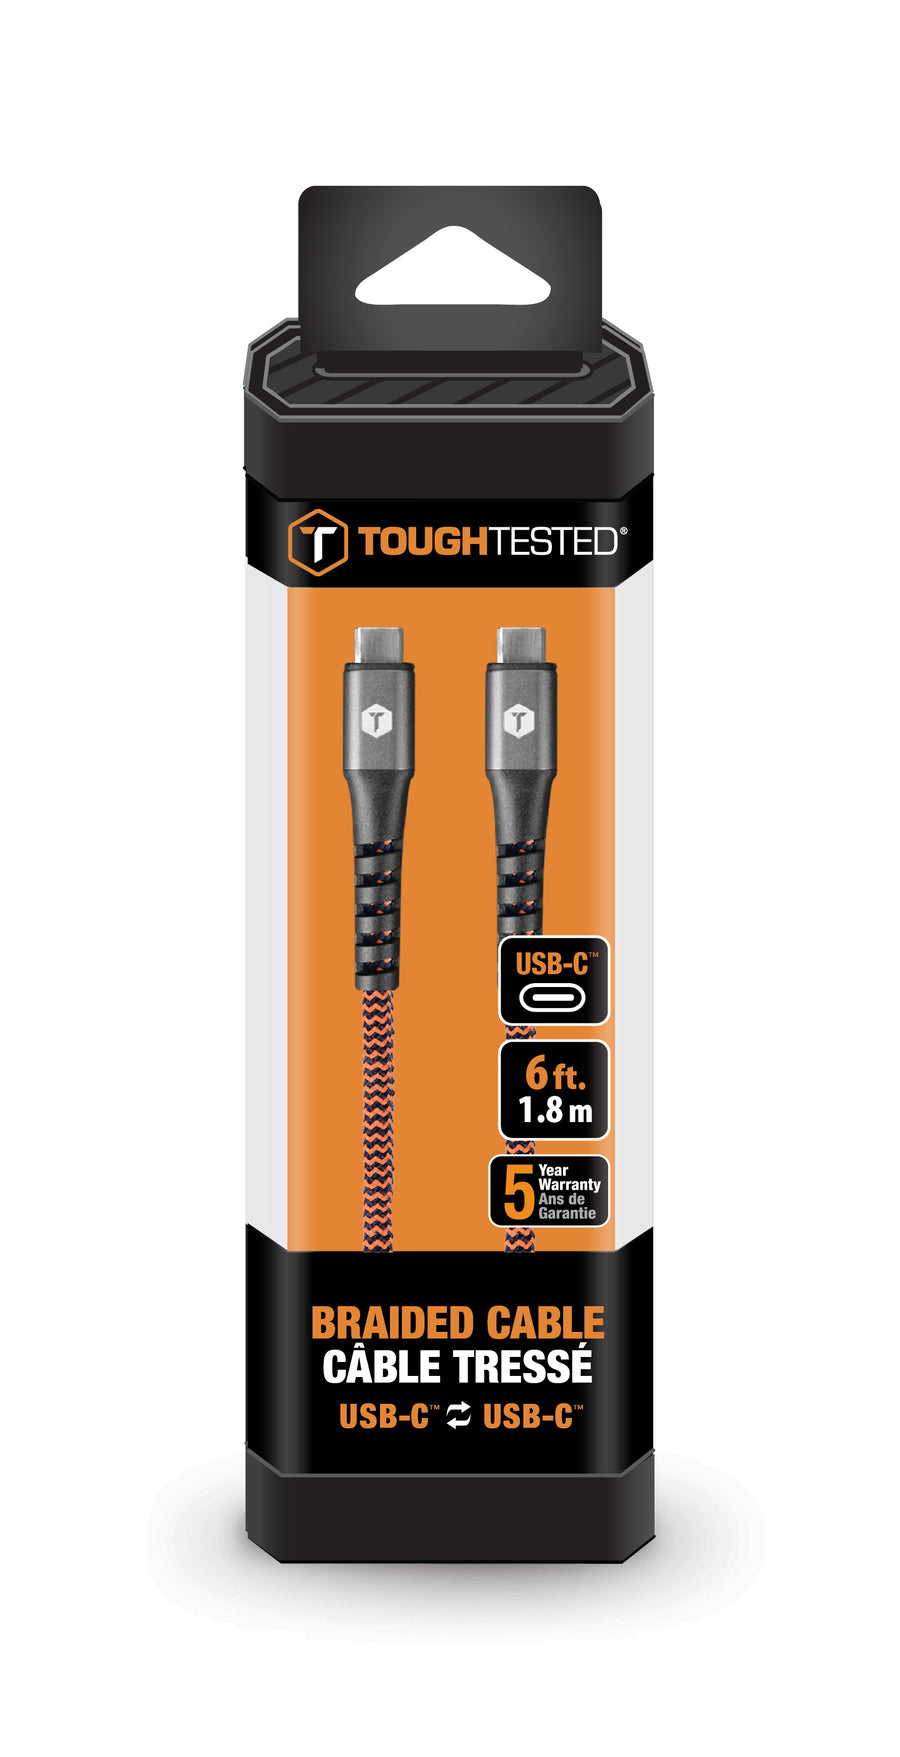 trek de wol over de ogen Ga trouwen Taalkunde Braided 6 Ft. USB Cable with USB-C to USB-C Connector – ToughTested